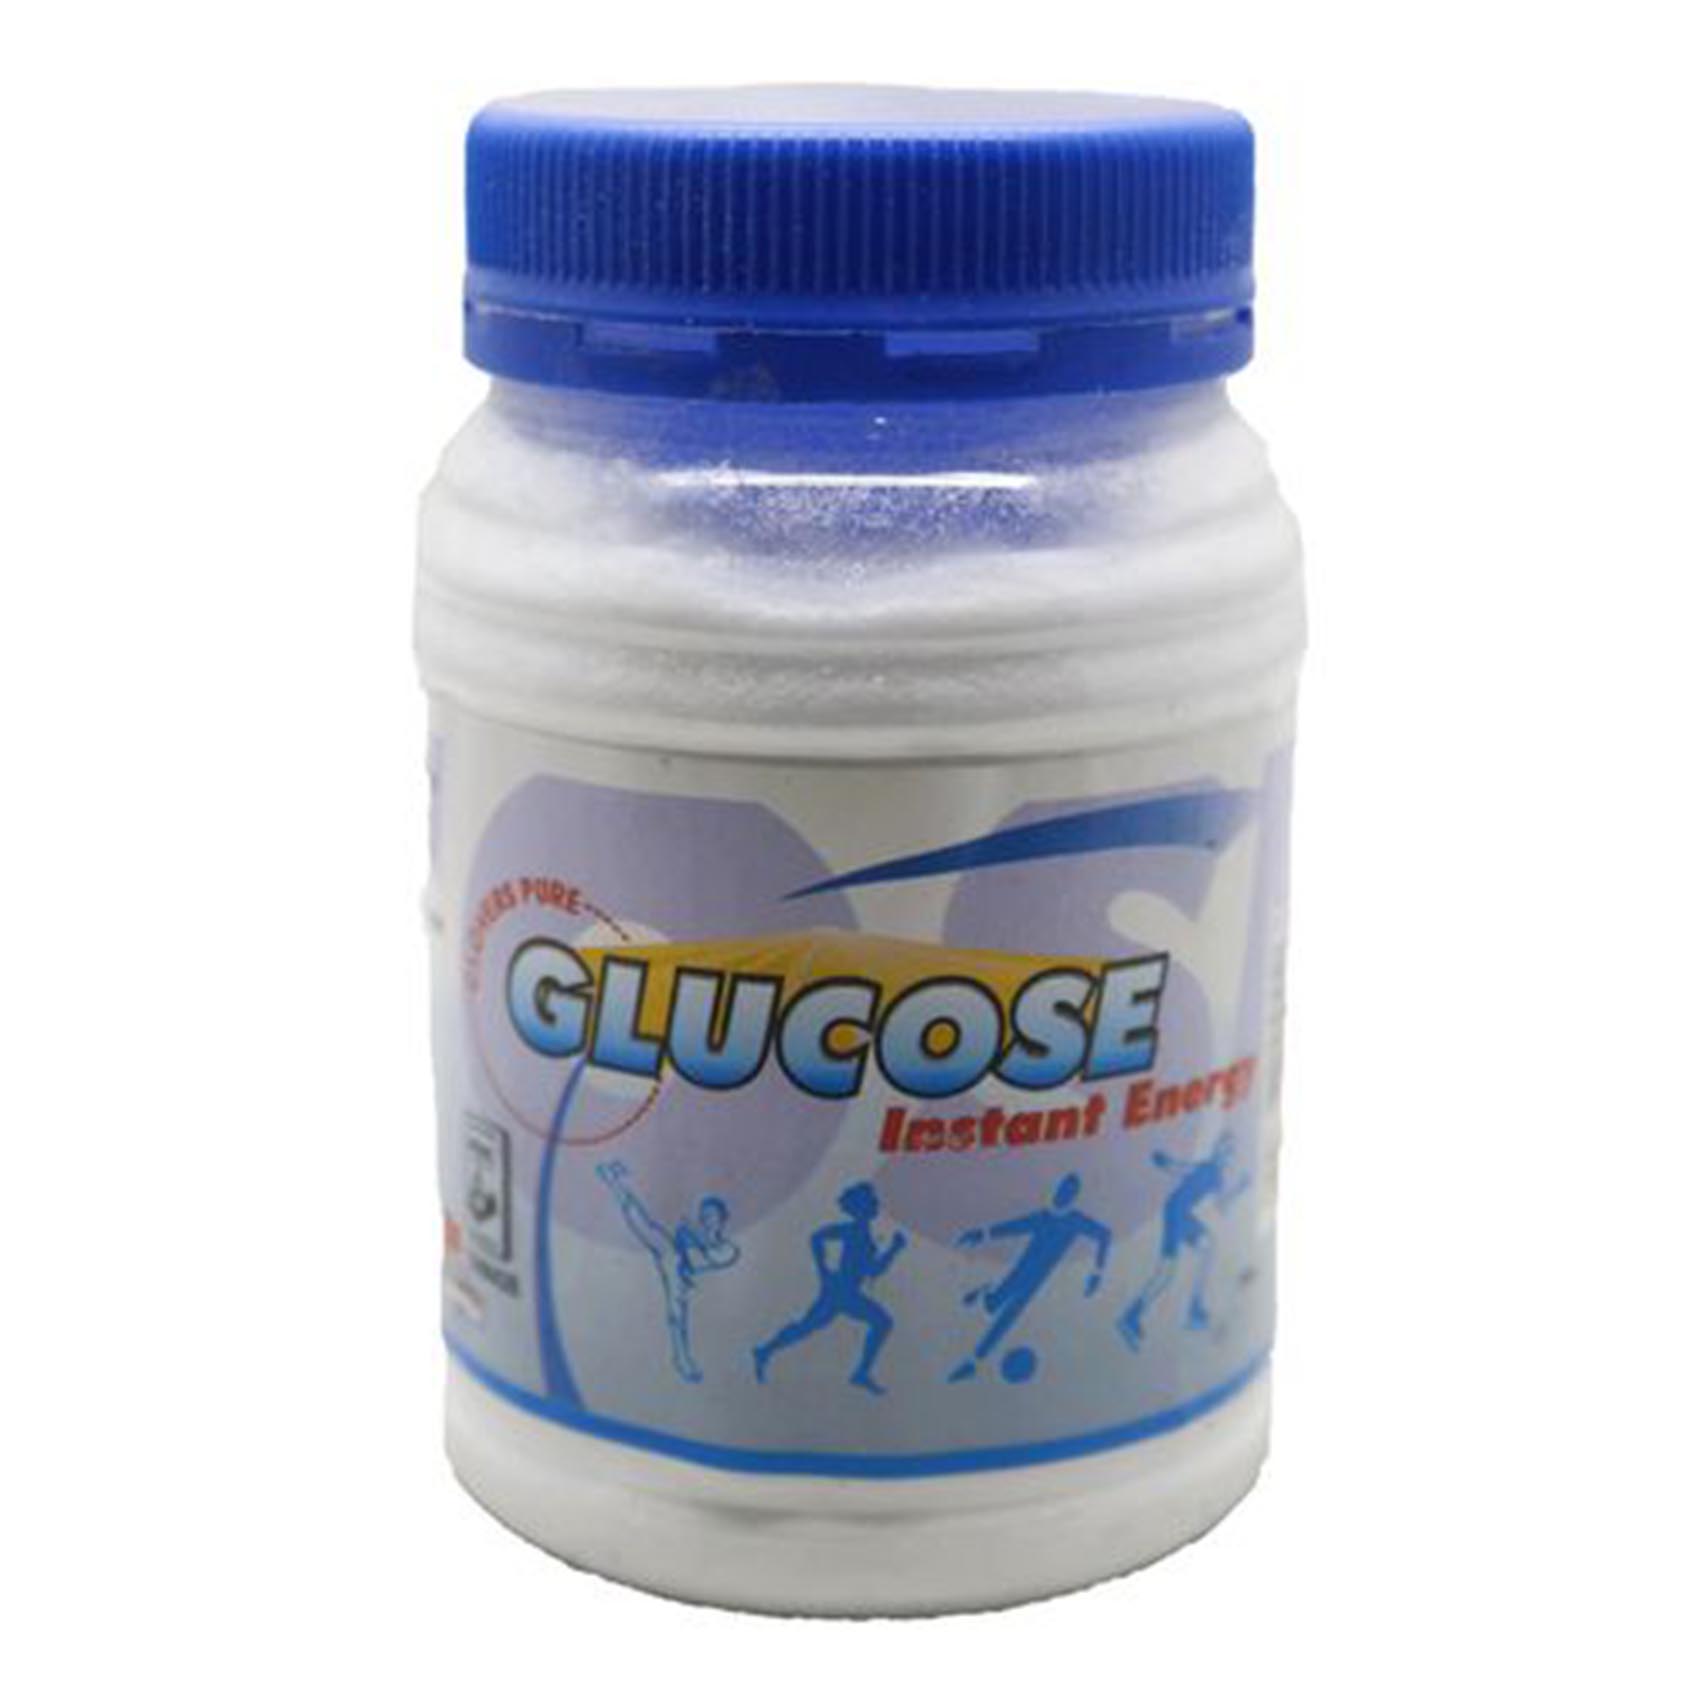 Clovers Pure Glucose Instant Energy Drink Powder 250g